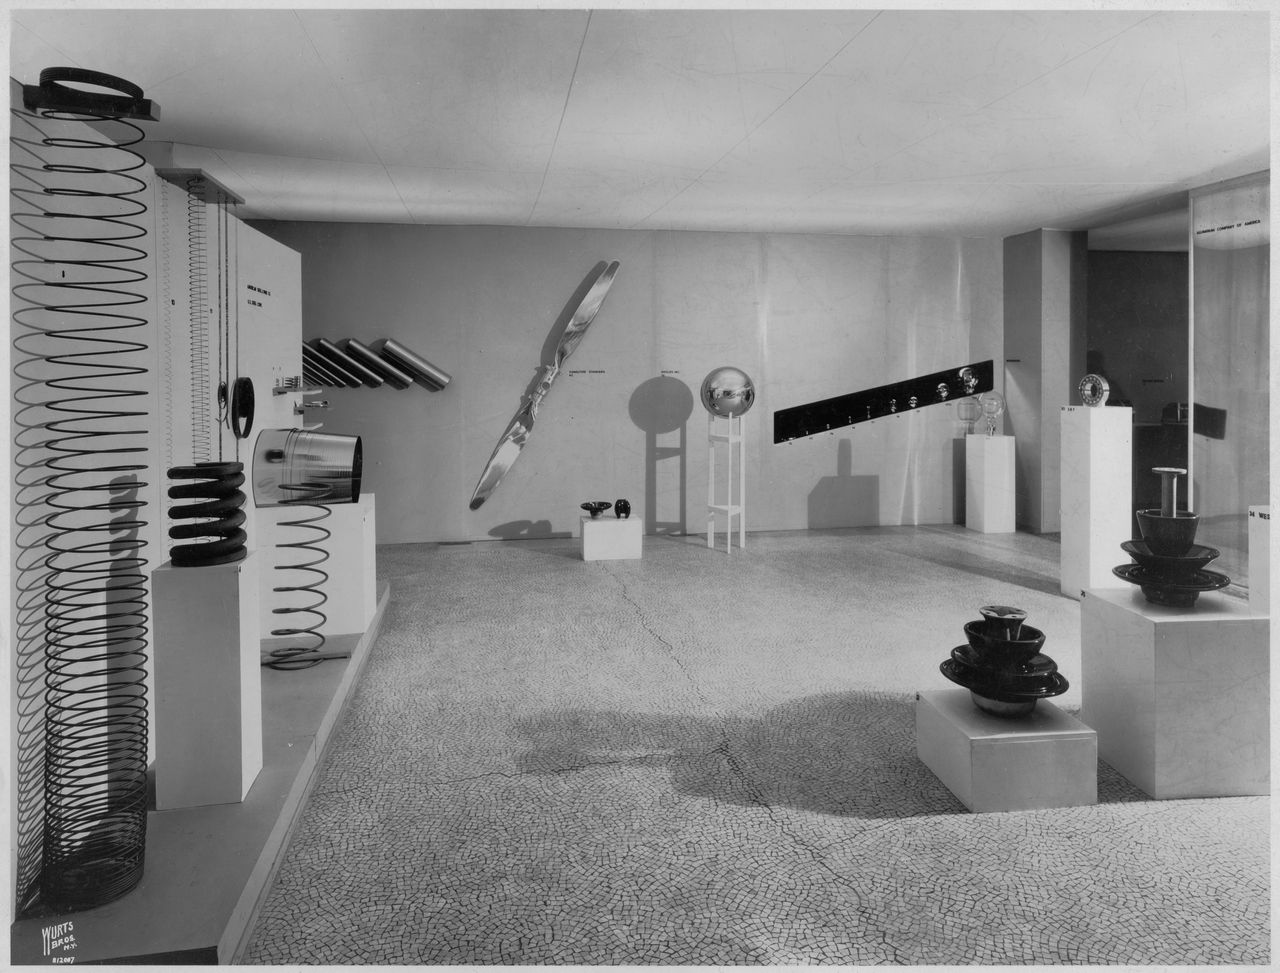 Installation view of the exhibition Machine Art, on view March 5, 1934 through April 29, 1934 at The Museum of Modern Art, New York.